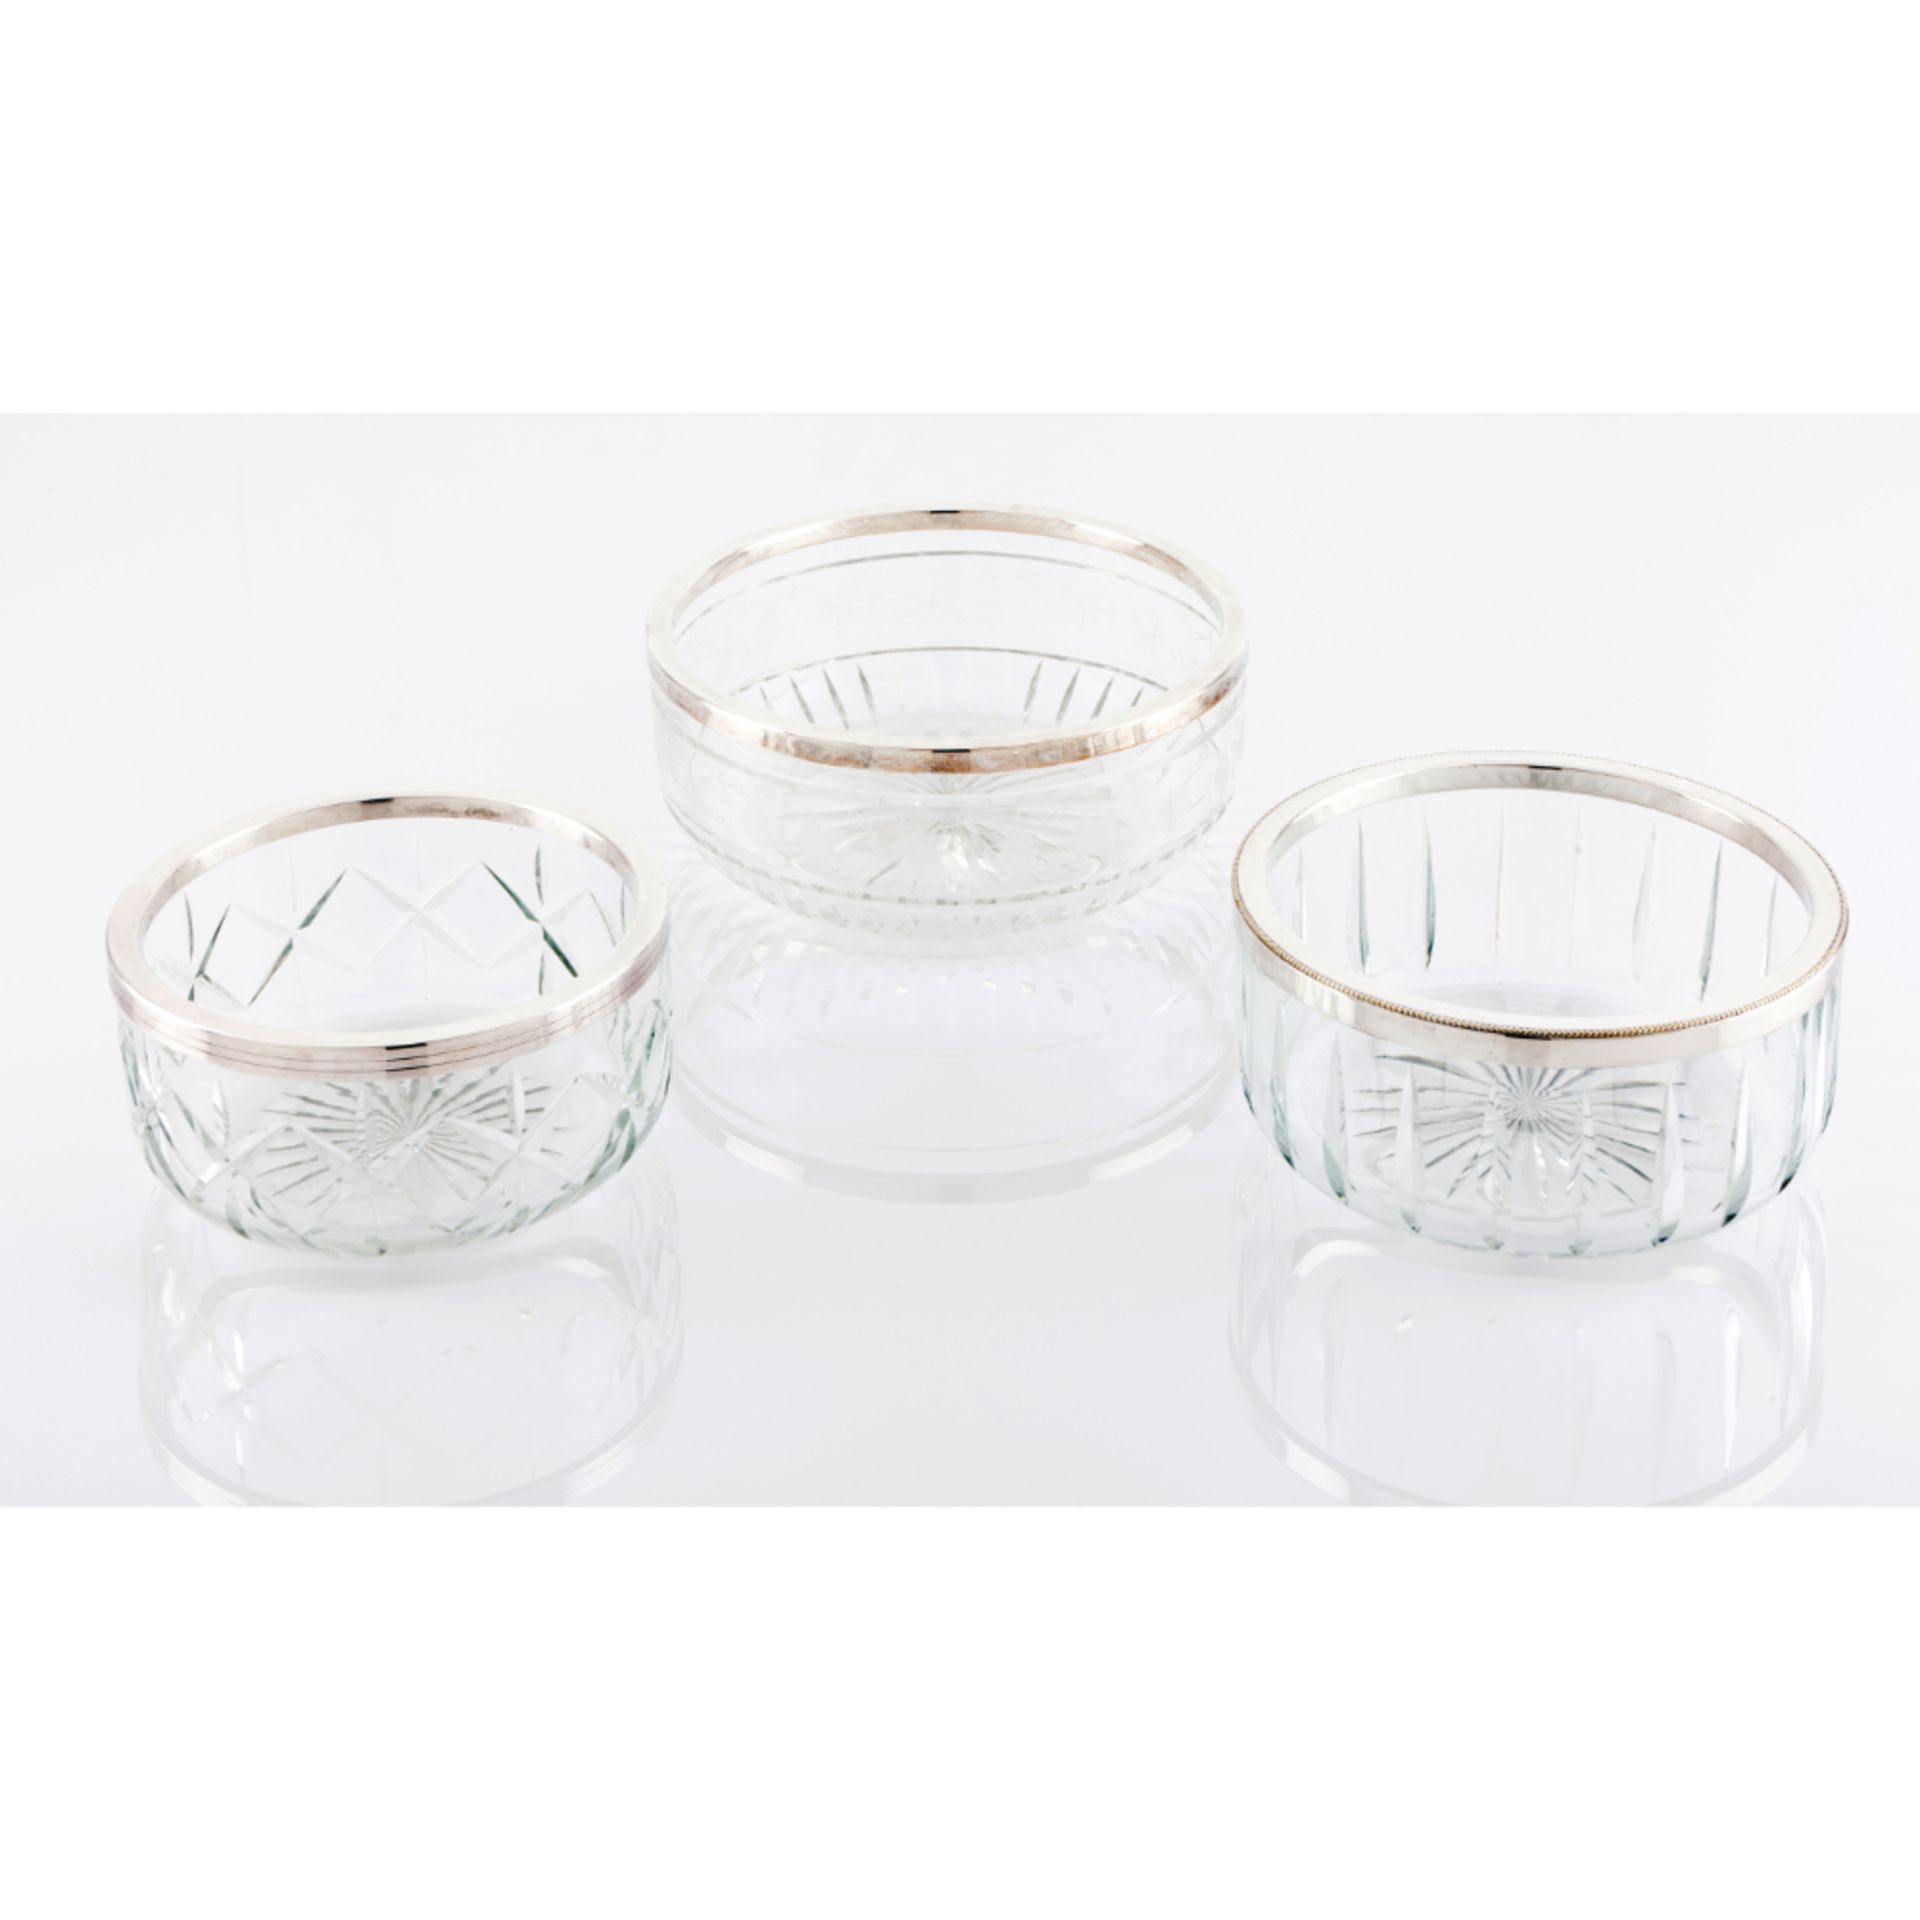 A group of 3 cut crystal dishes